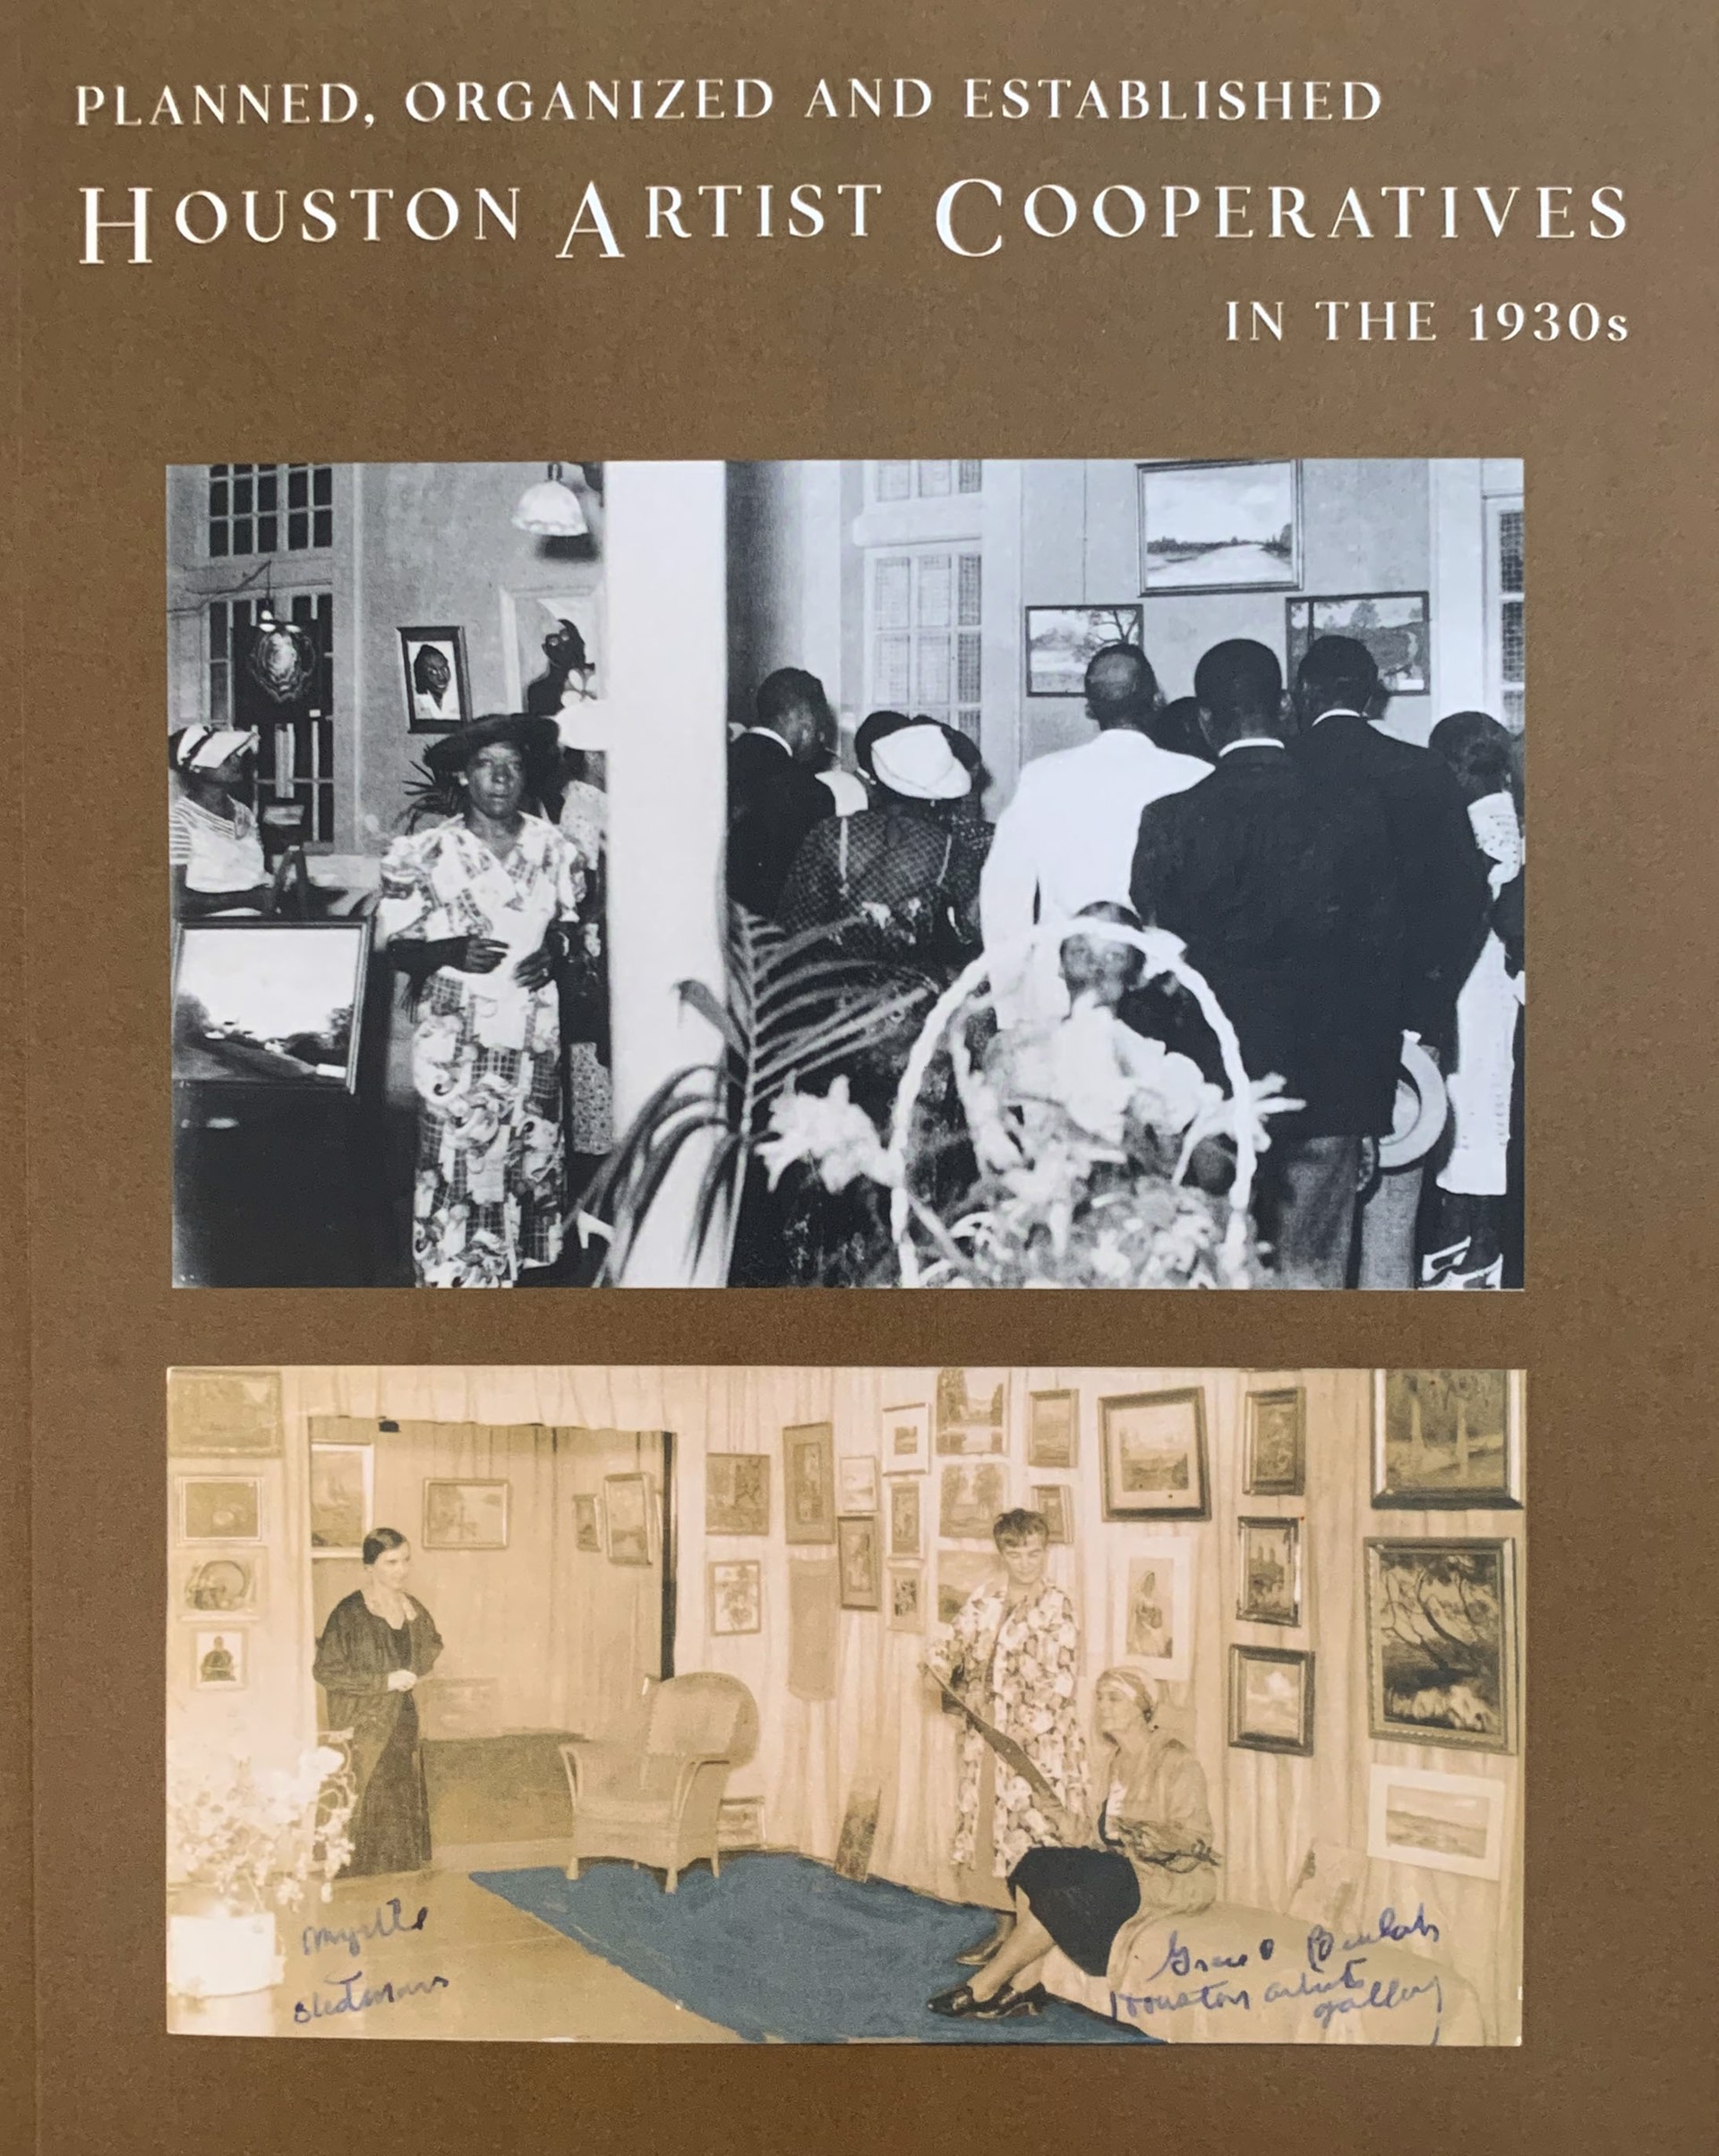 Houston Artist Cooperatives in the 1930s by Publications